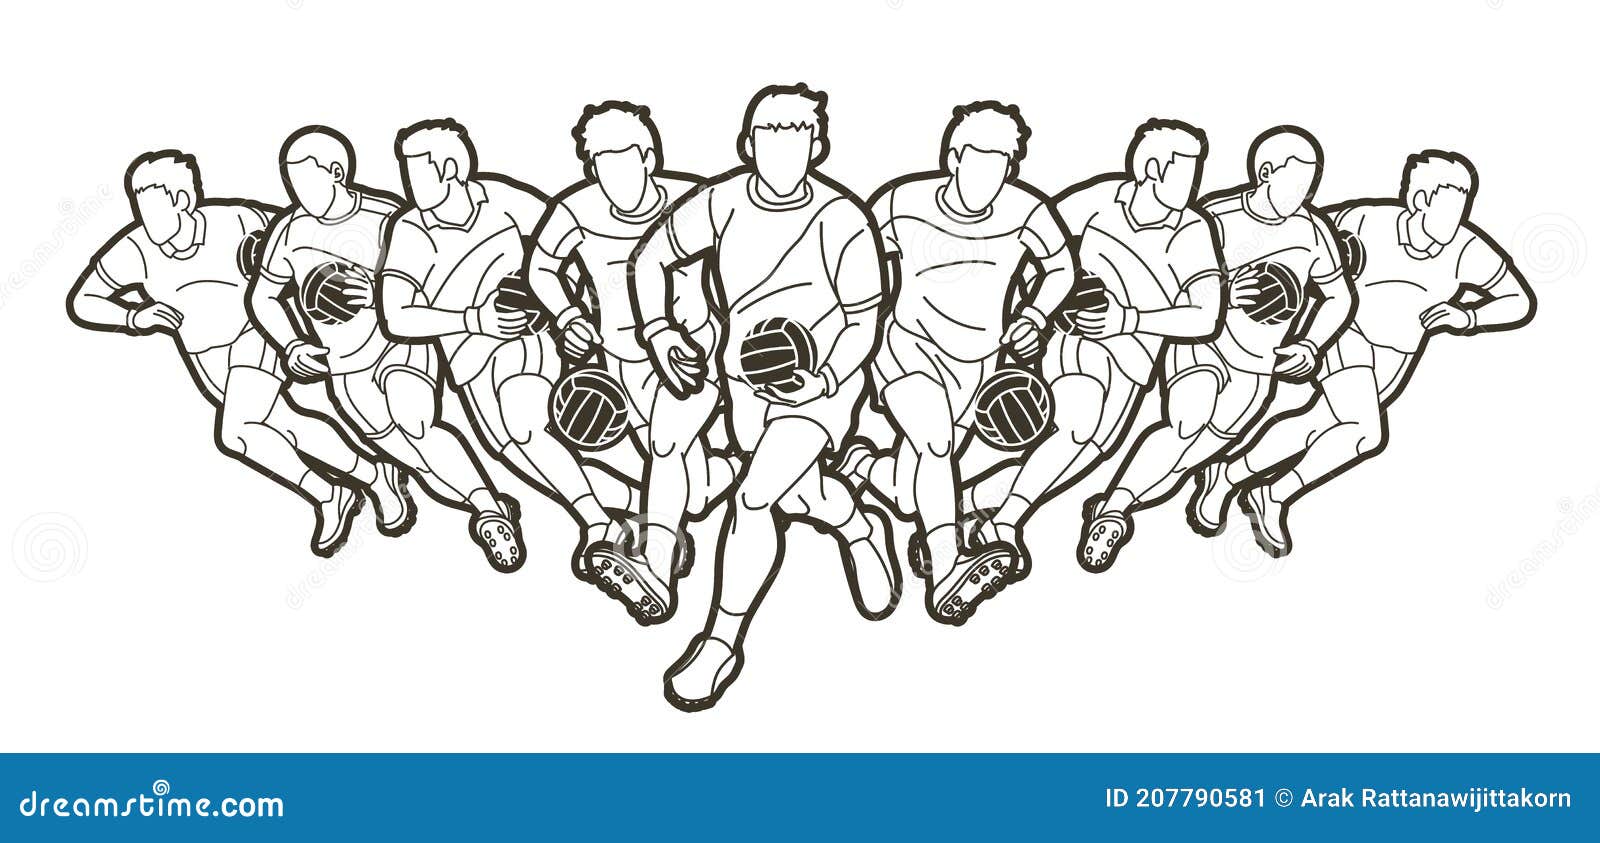 group of gaelic football men players action cartoon graphic .